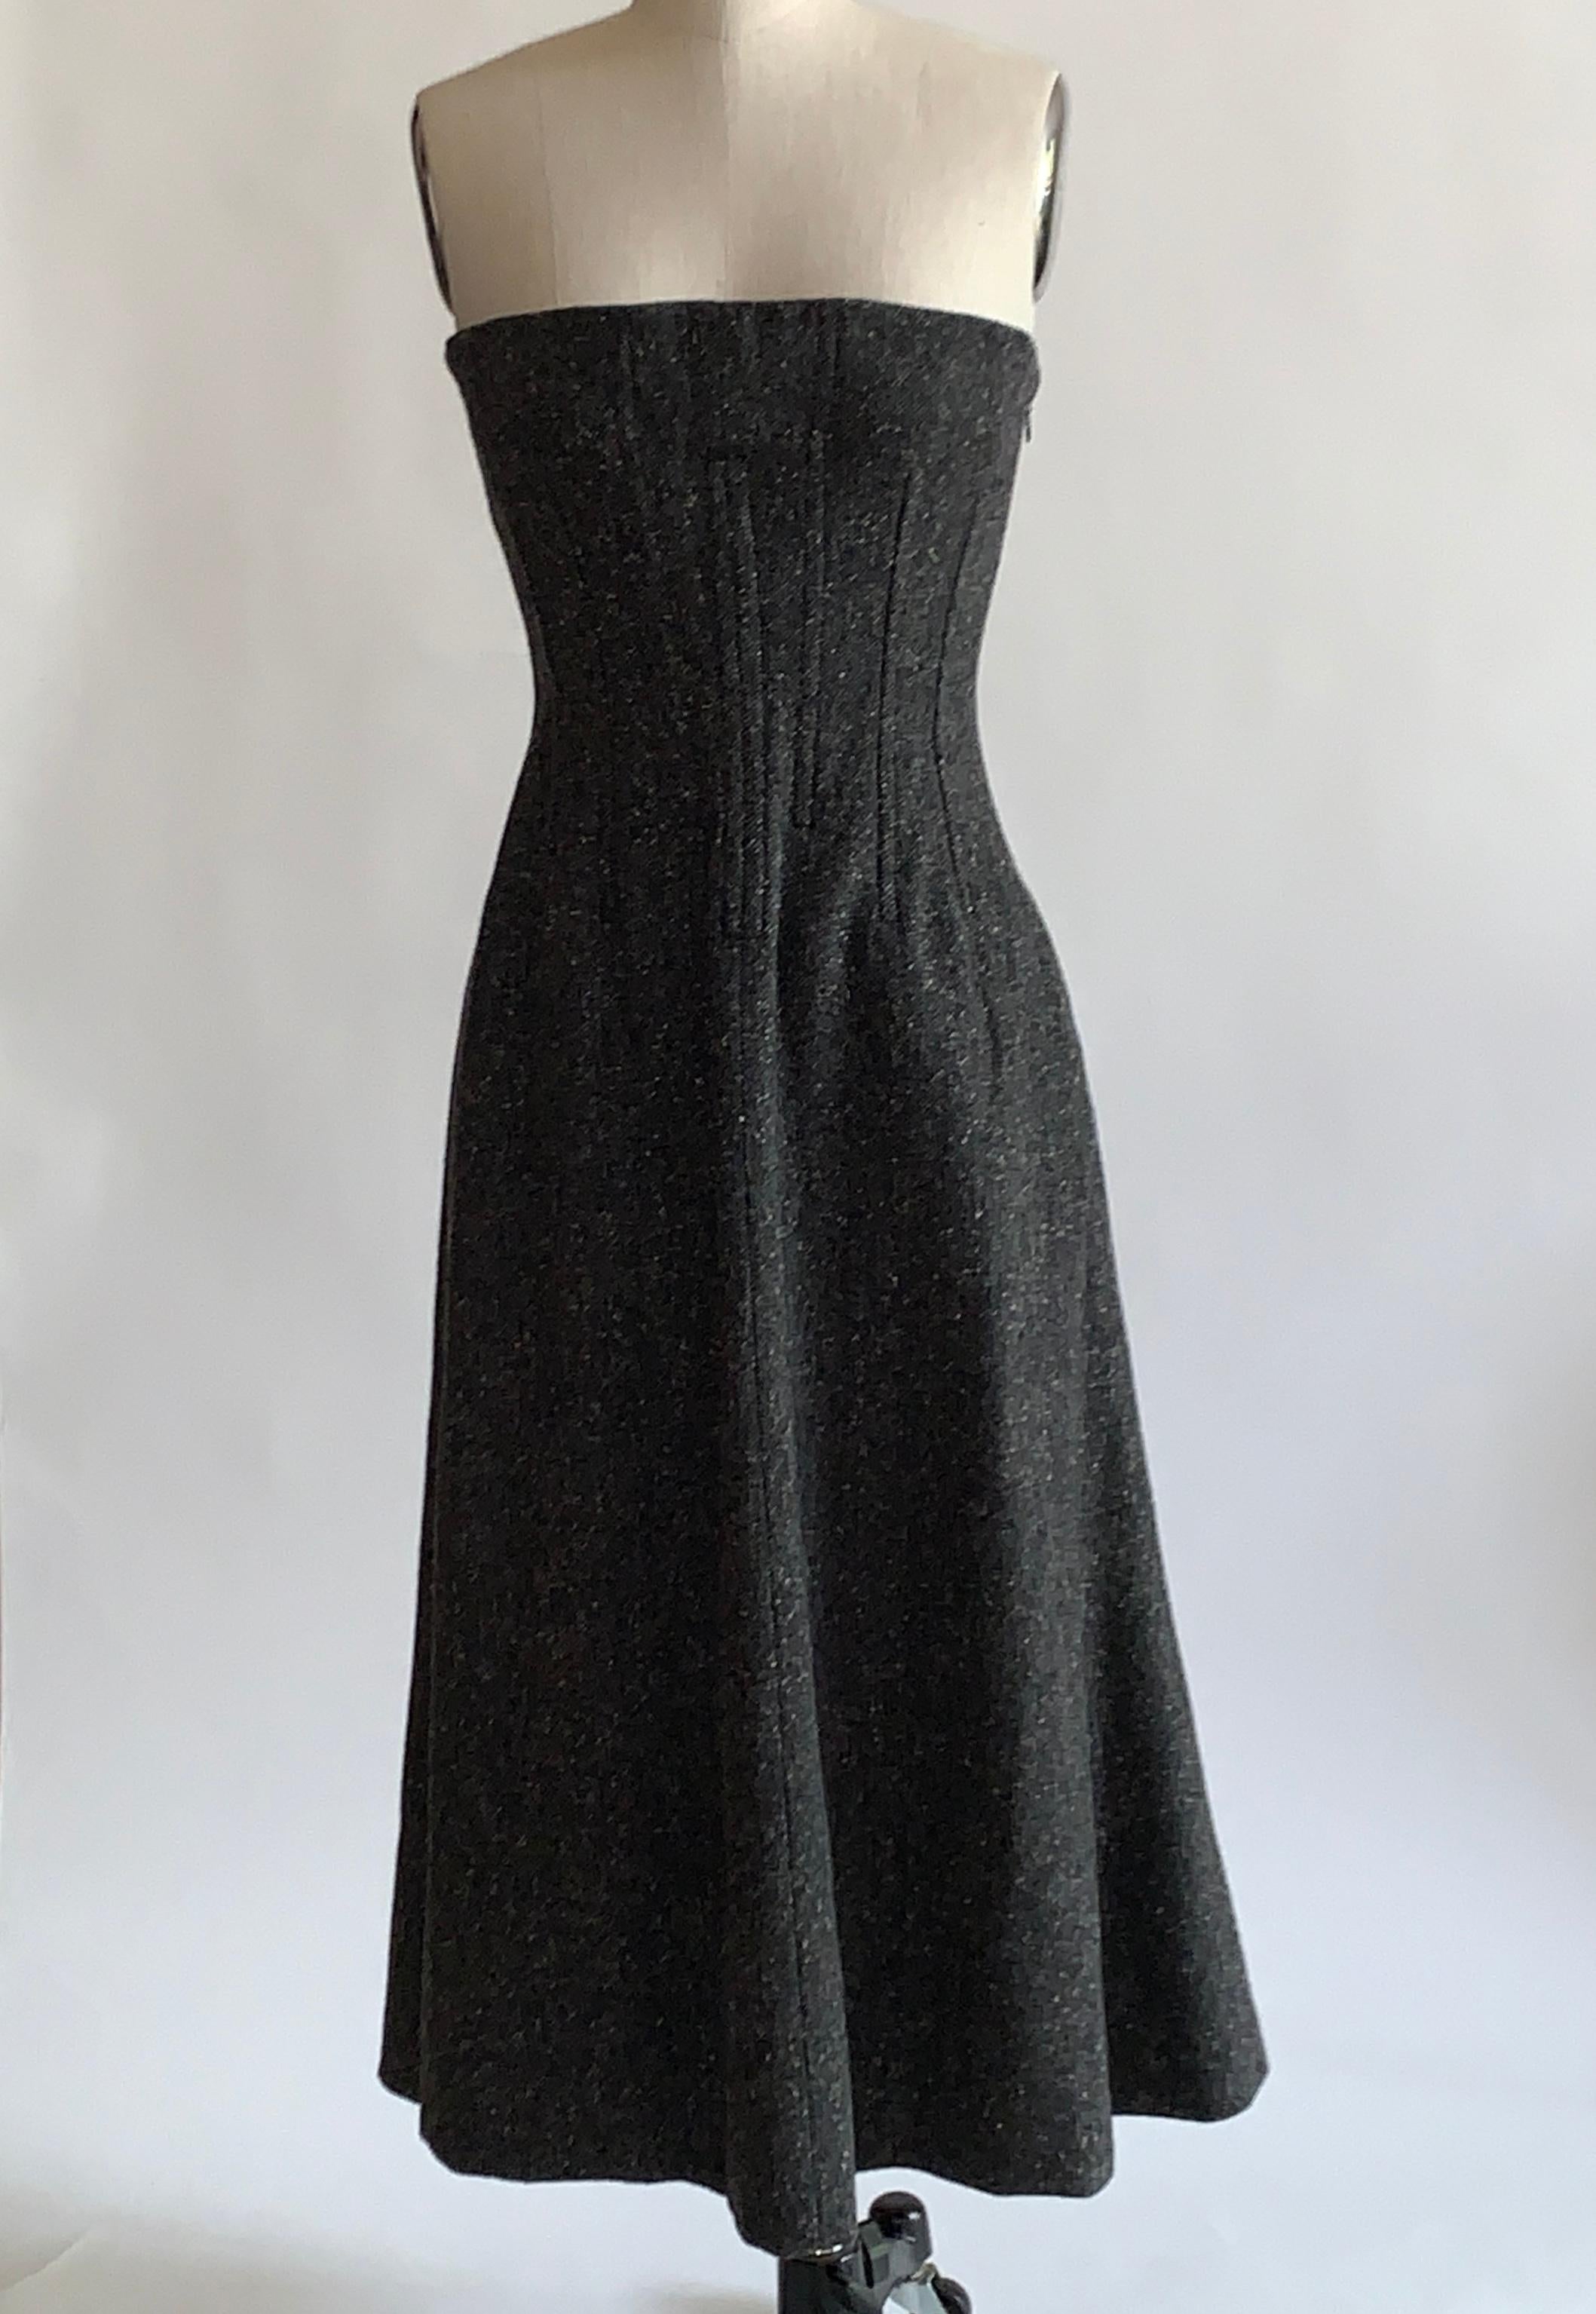 Dolce & Gabbana grey tweed strapless fit and flare dress with black corset seamed bodice and lace up detail at back. Side zip and hook and eye, boning at interior bodice for shape & structure.

Very sexy on it's own, but would also be cool layered